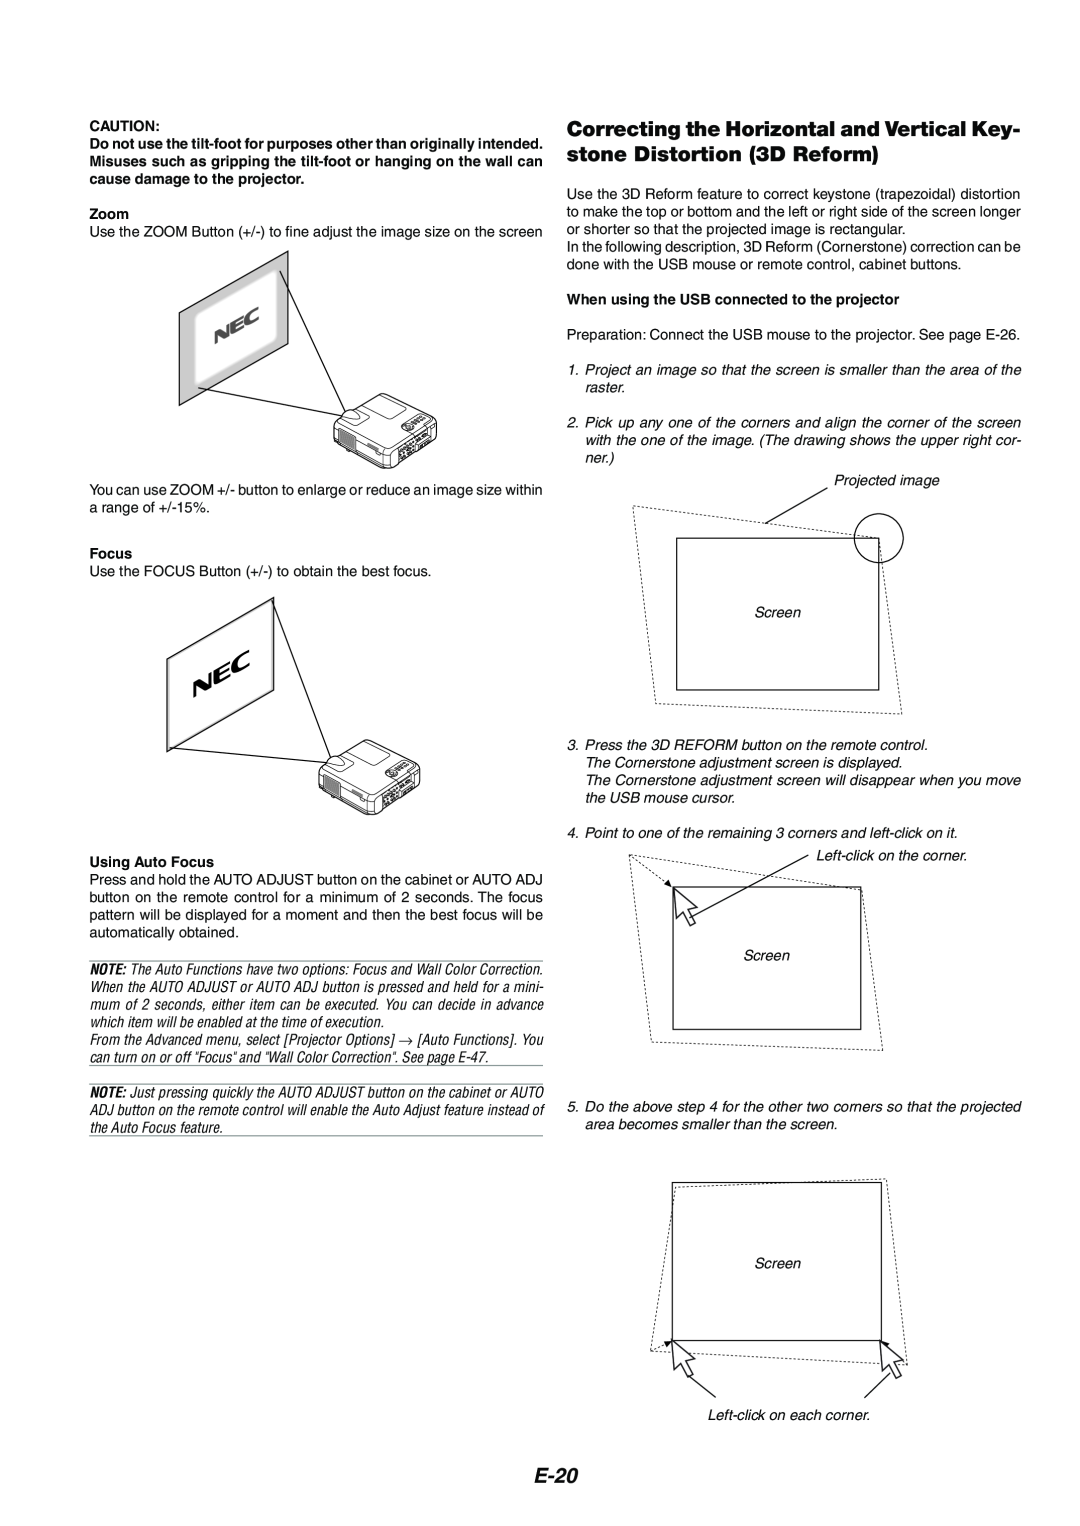 NEC MT1065/MT1060 user manual E-20, Zoom, When using the USB connected to the projector, Using Auto Focus 